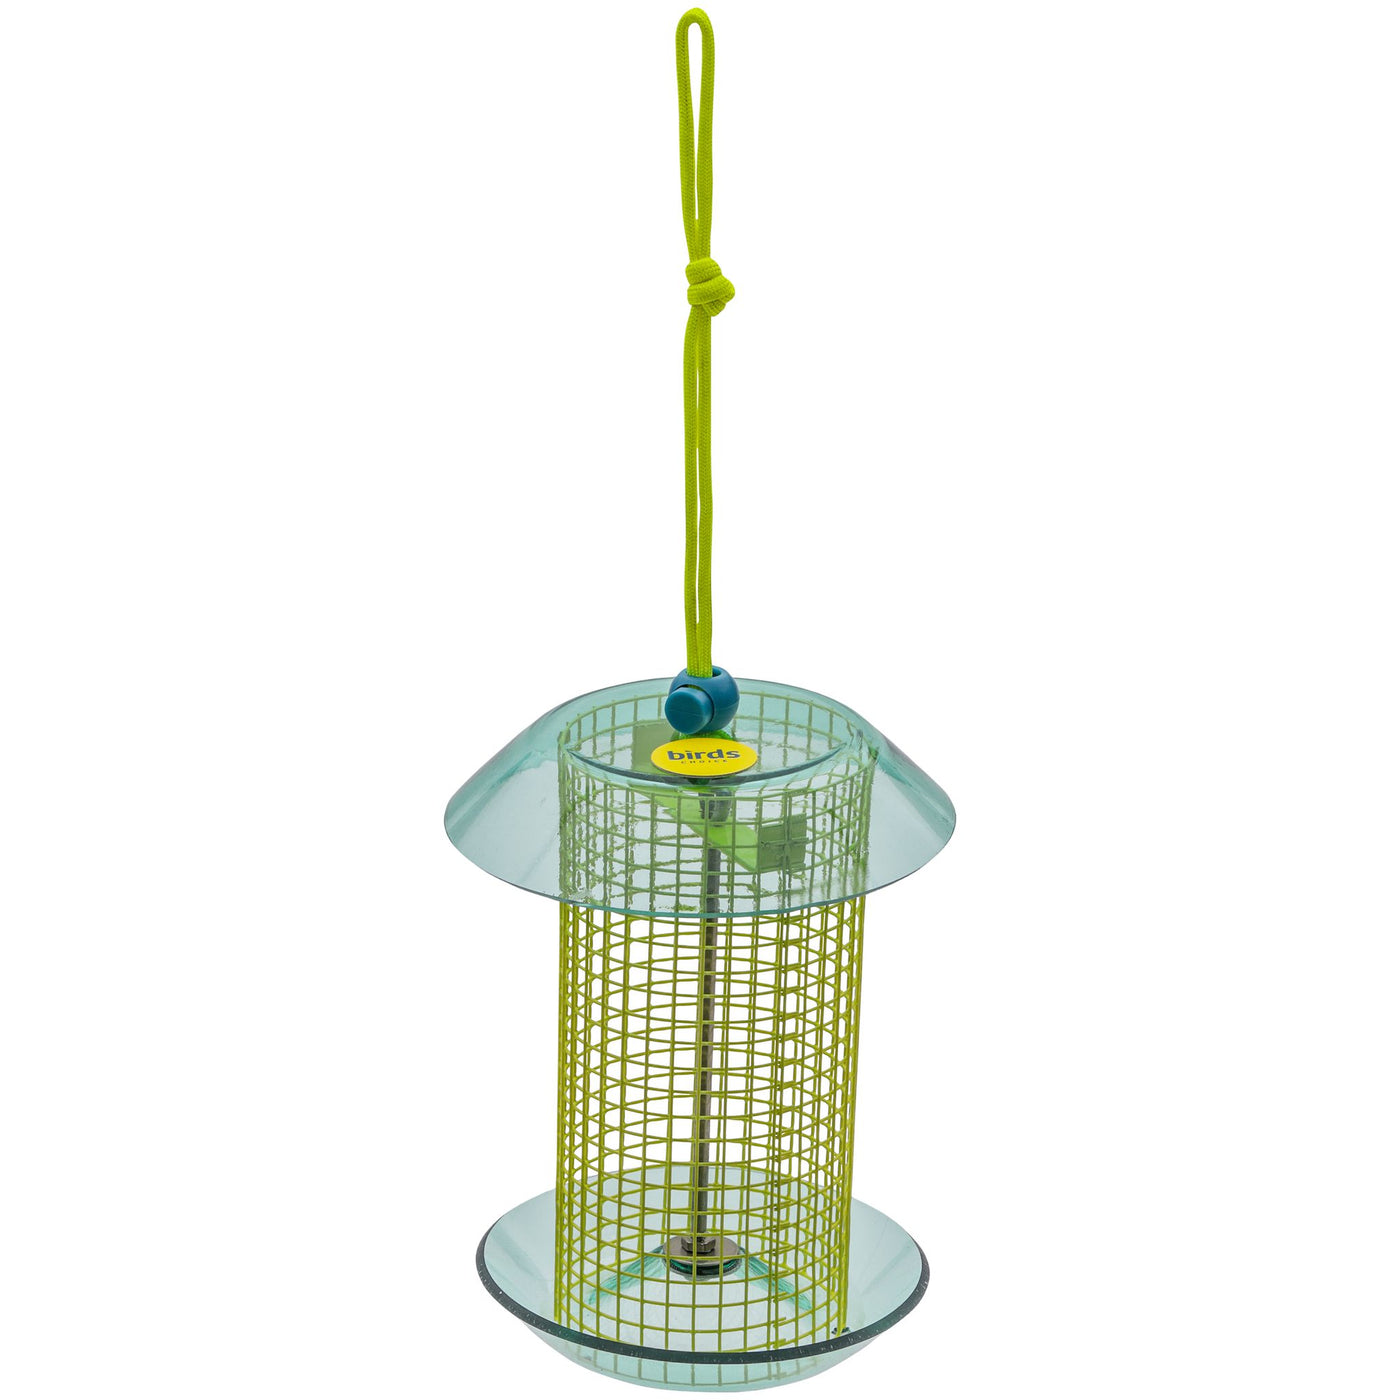 Small Sunflower Seed Feeder Color Pop Collection in Teal and Yellow - Birds Choice